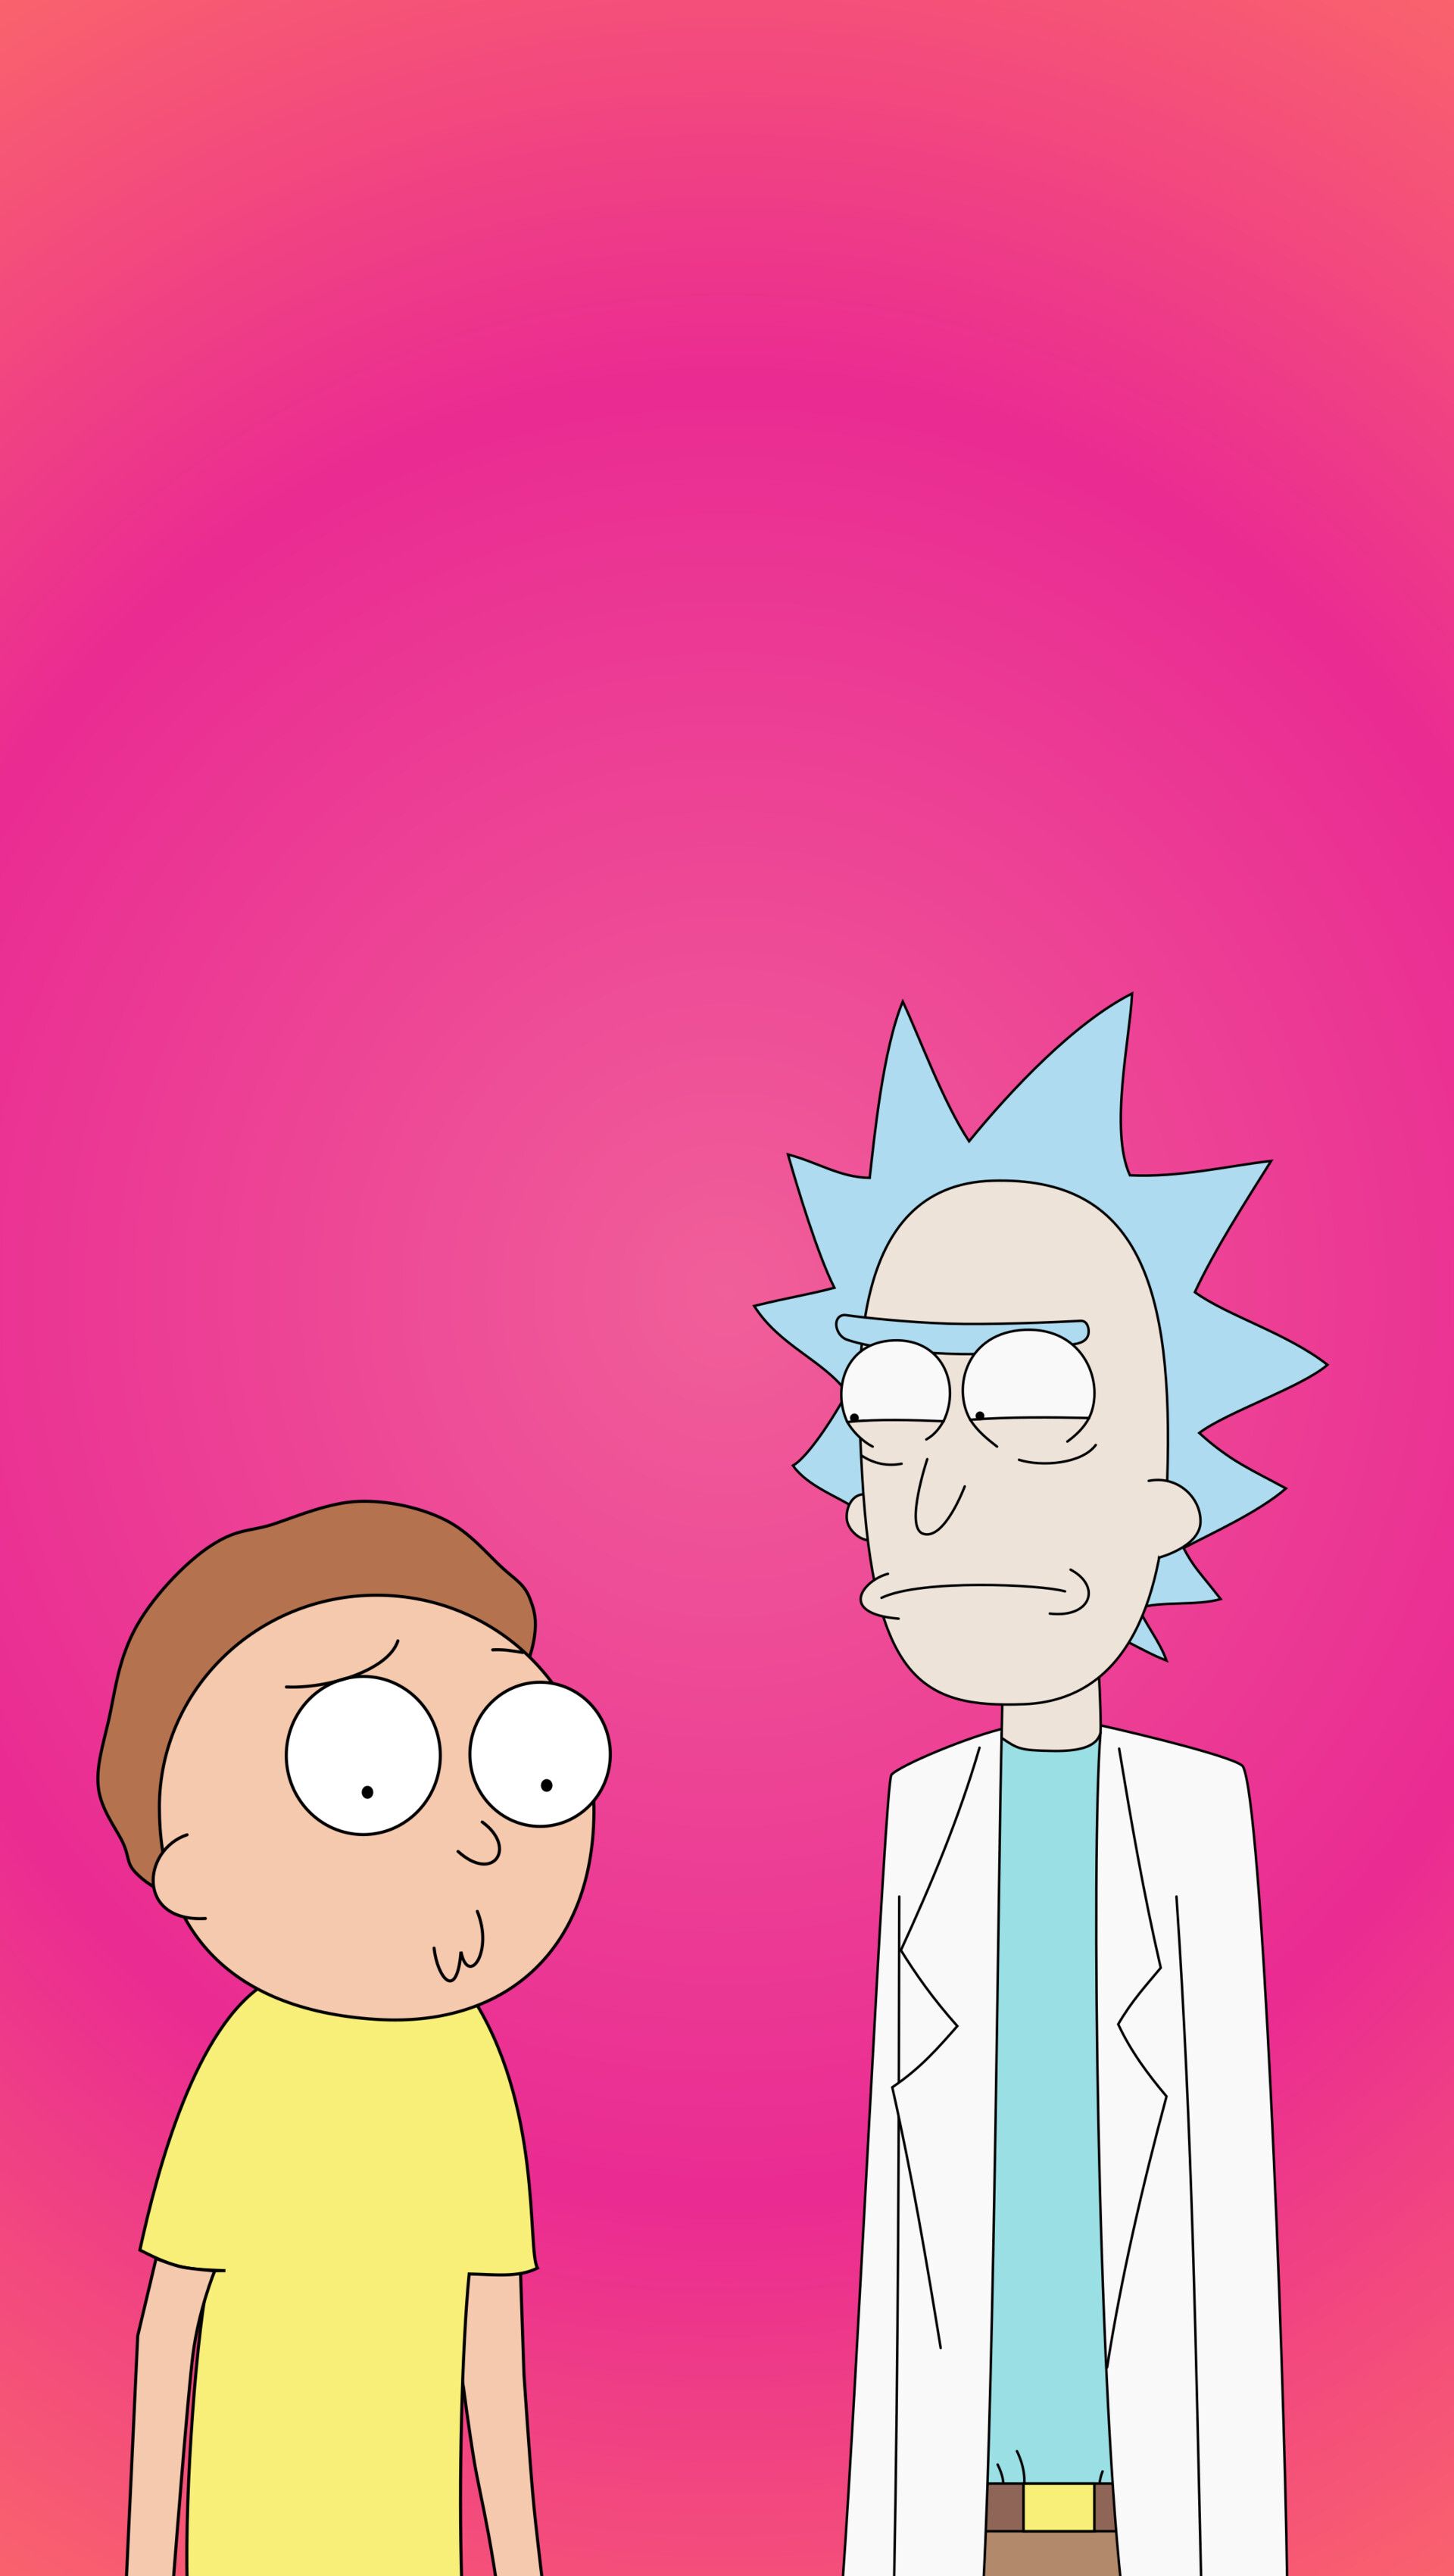 Rick and Morty wallpaper for mobiles and tablets - Rick and Morty